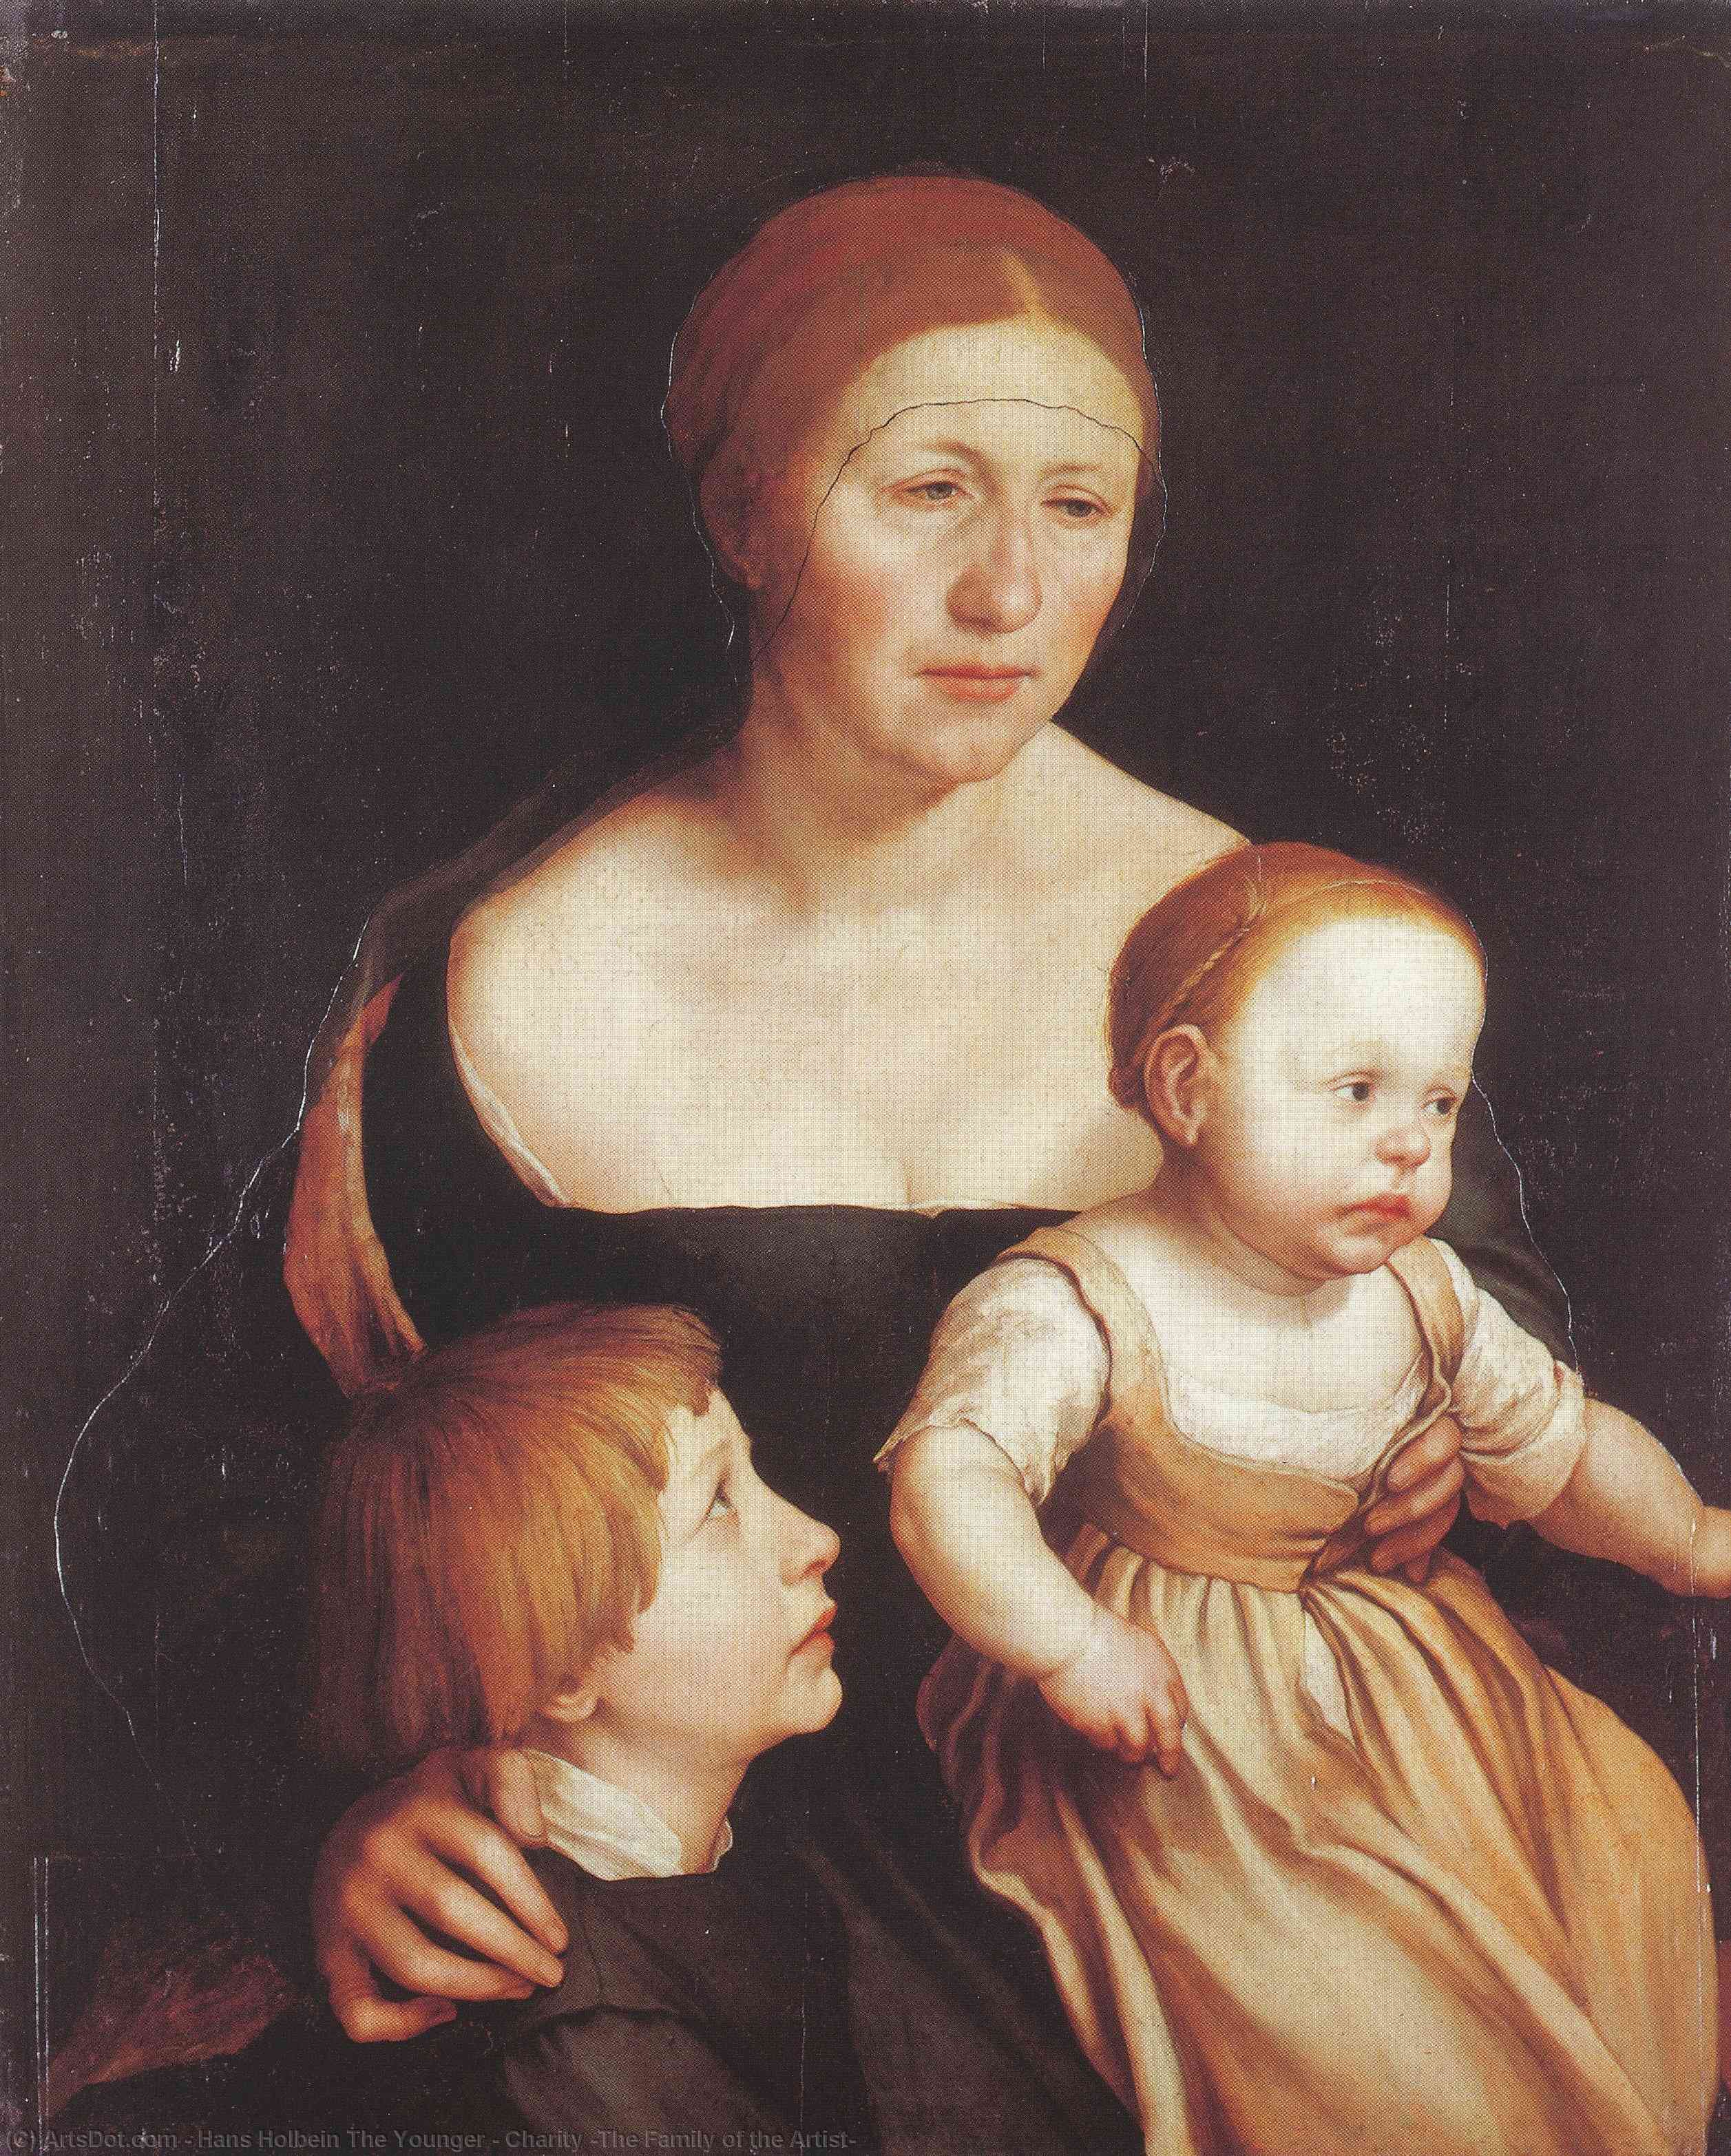 Order Oil Painting Replica Charity (The Family of the Artist), 1528 by Hans Holbein The Younger (1497-1543, Italy) | ArtsDot.com